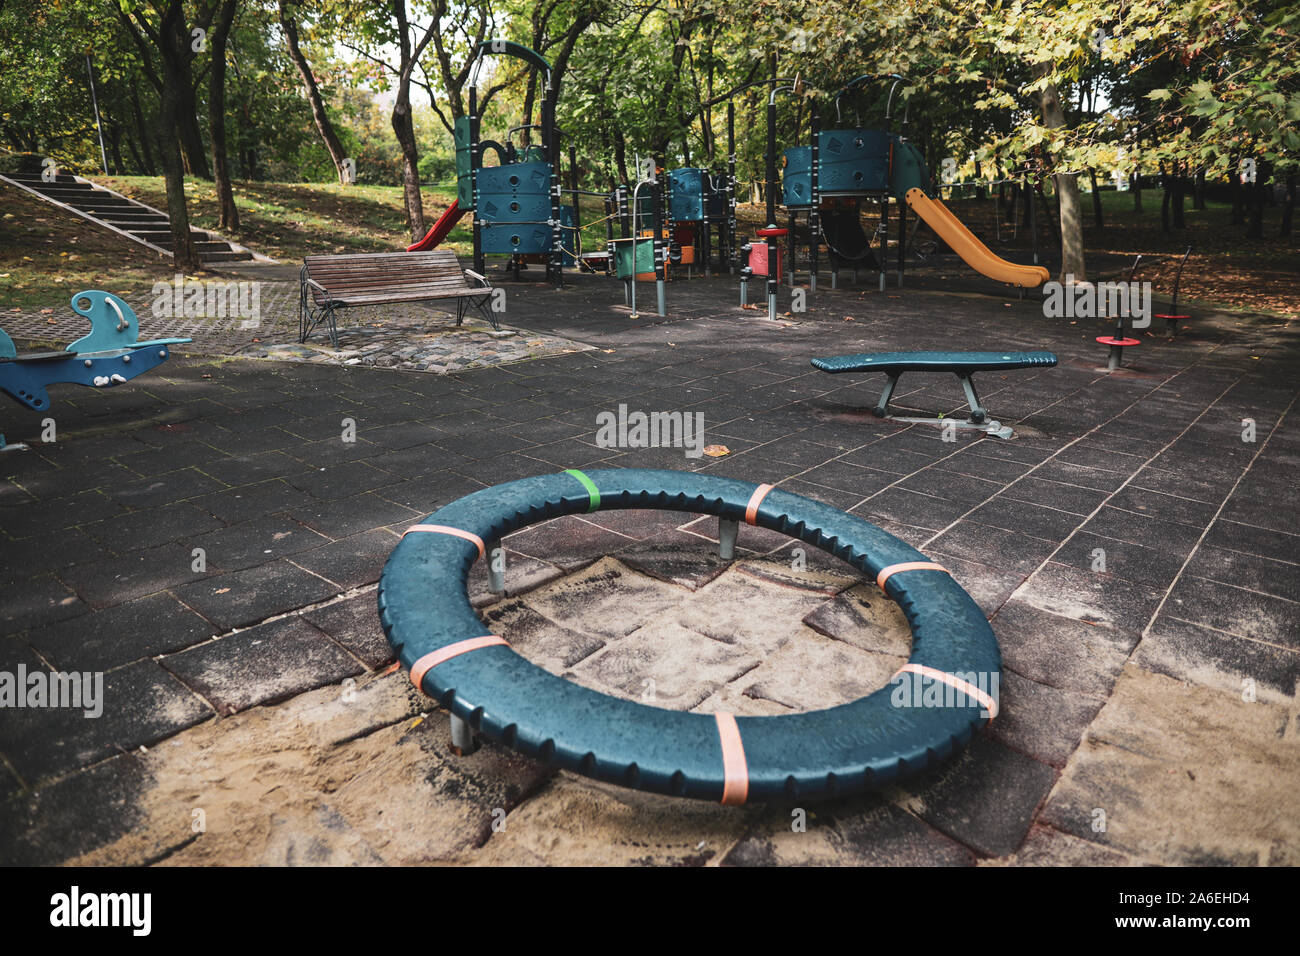 Colorful children's playground with slides, swings and other objects in a public park with many trees around and no people Stock Photo